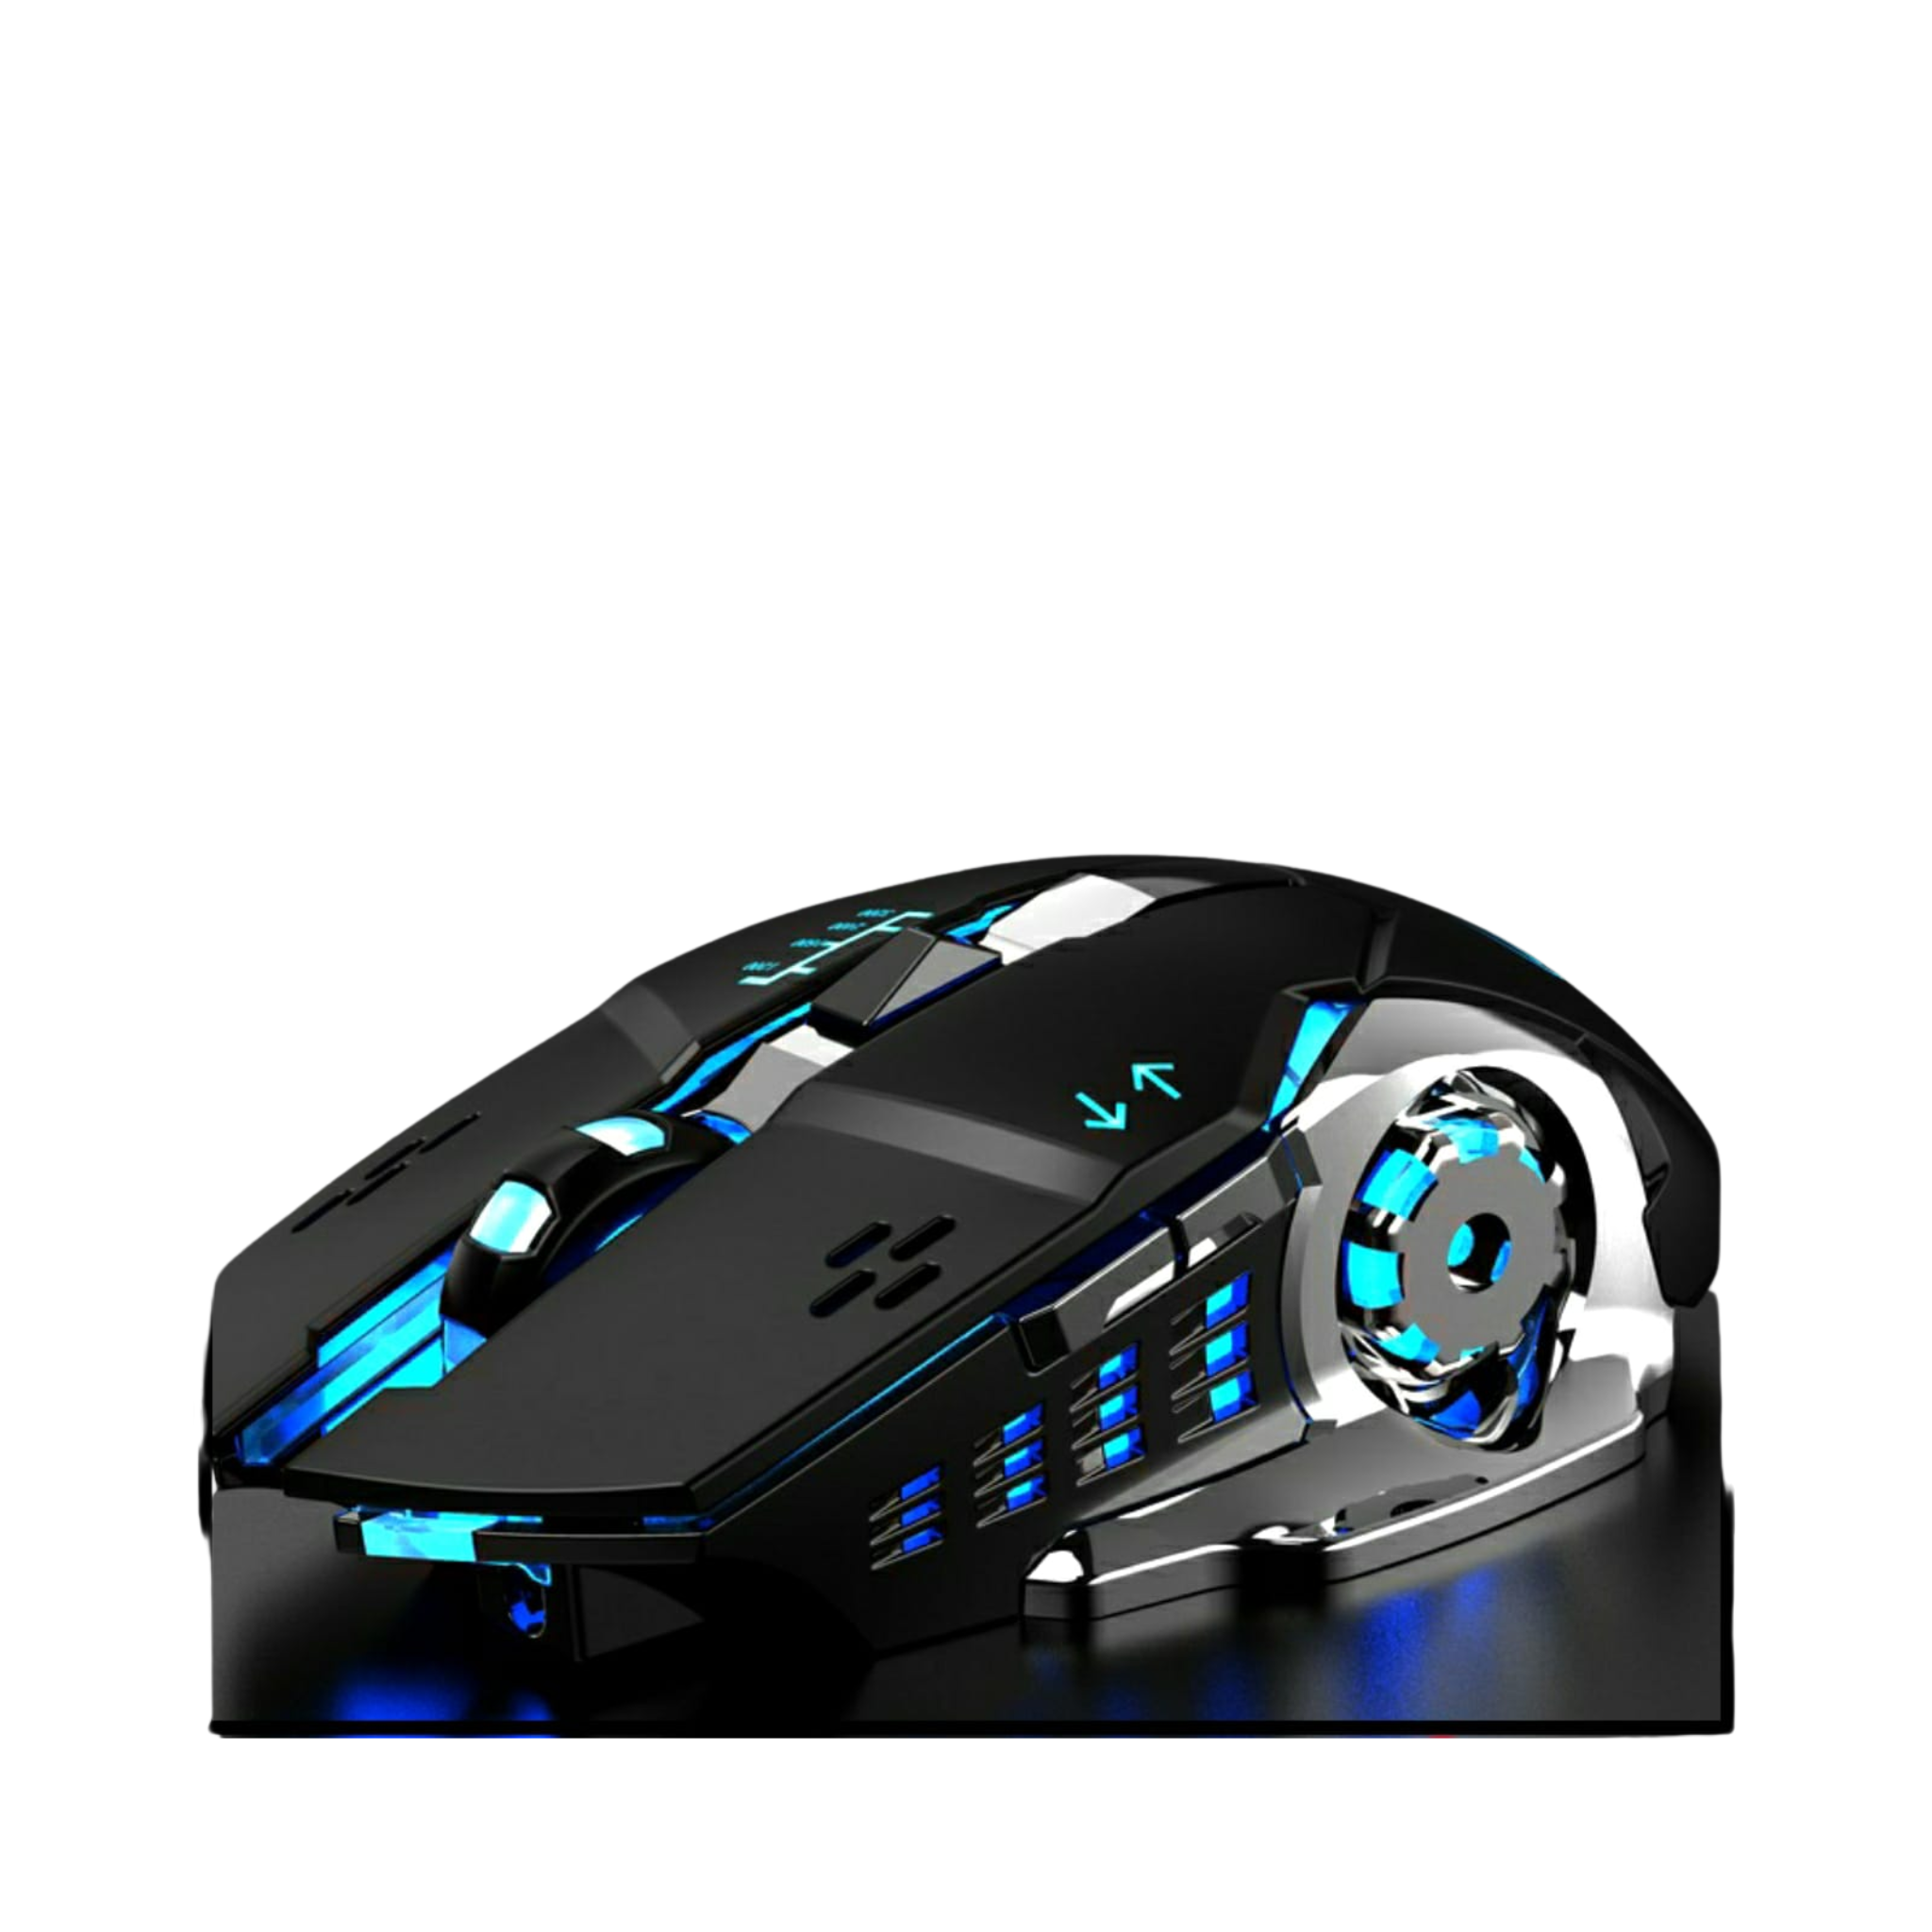 Mouse, with Back Foreword 6 Button, for Gaming